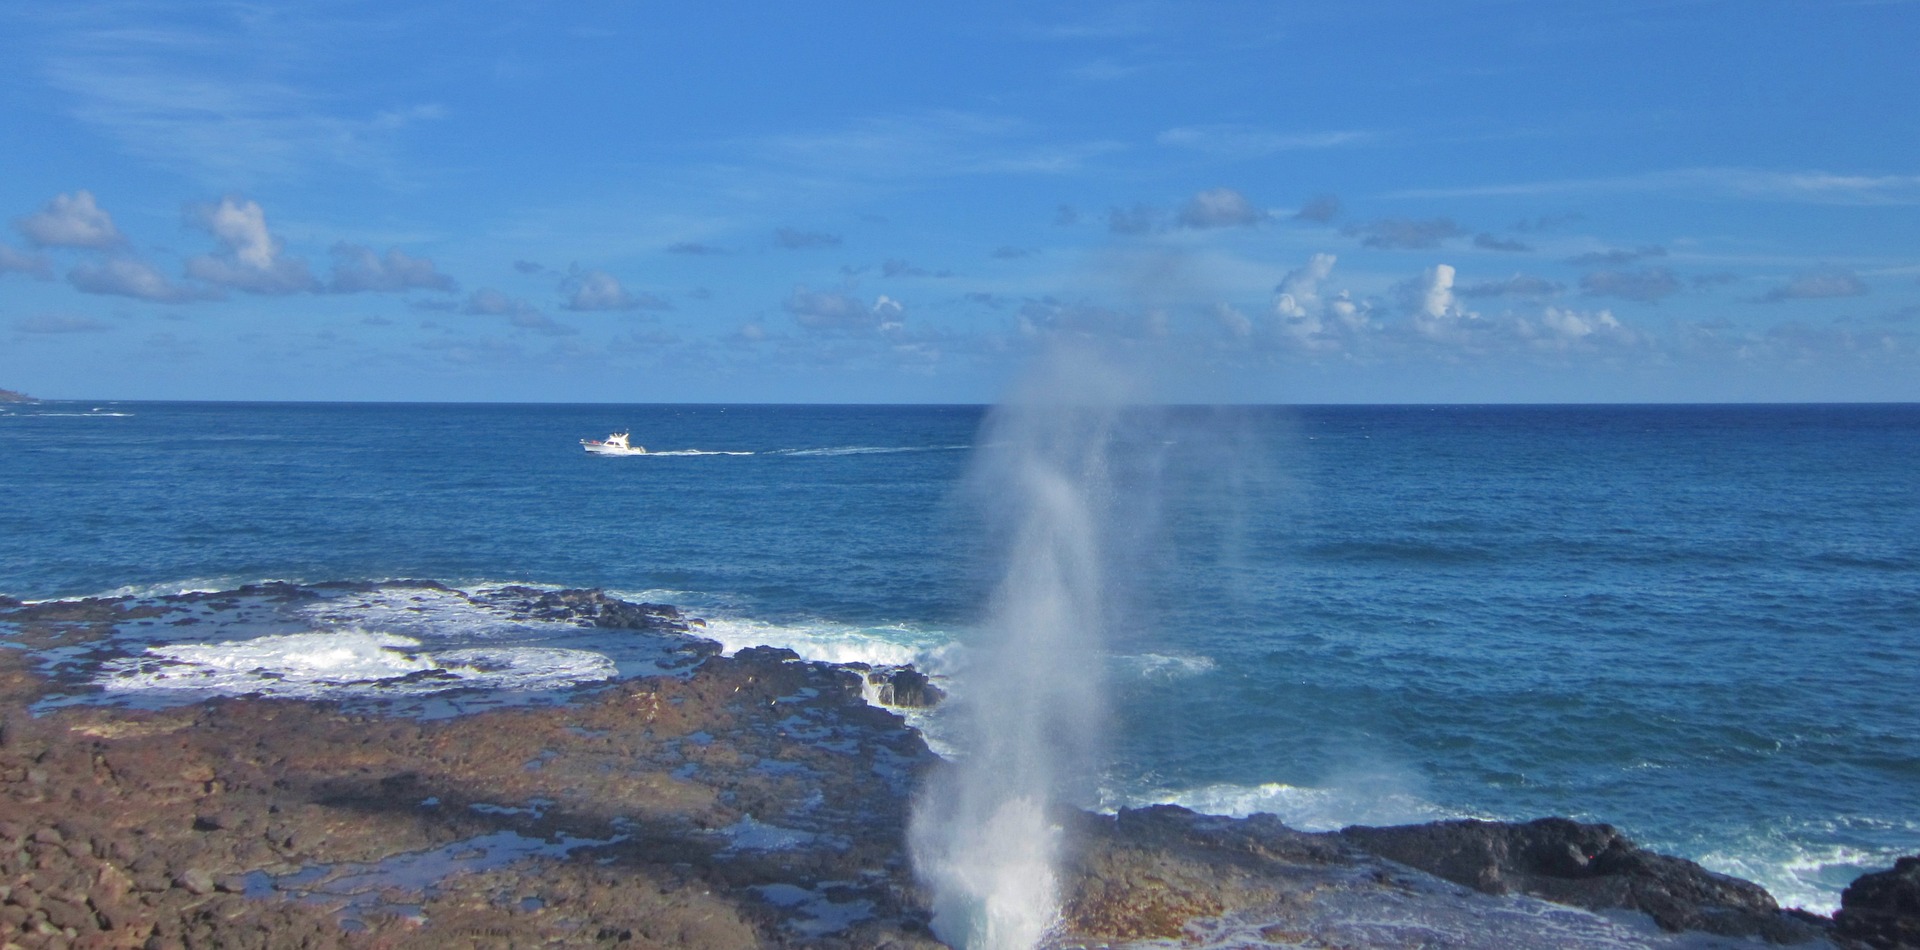 The Spouting Horn